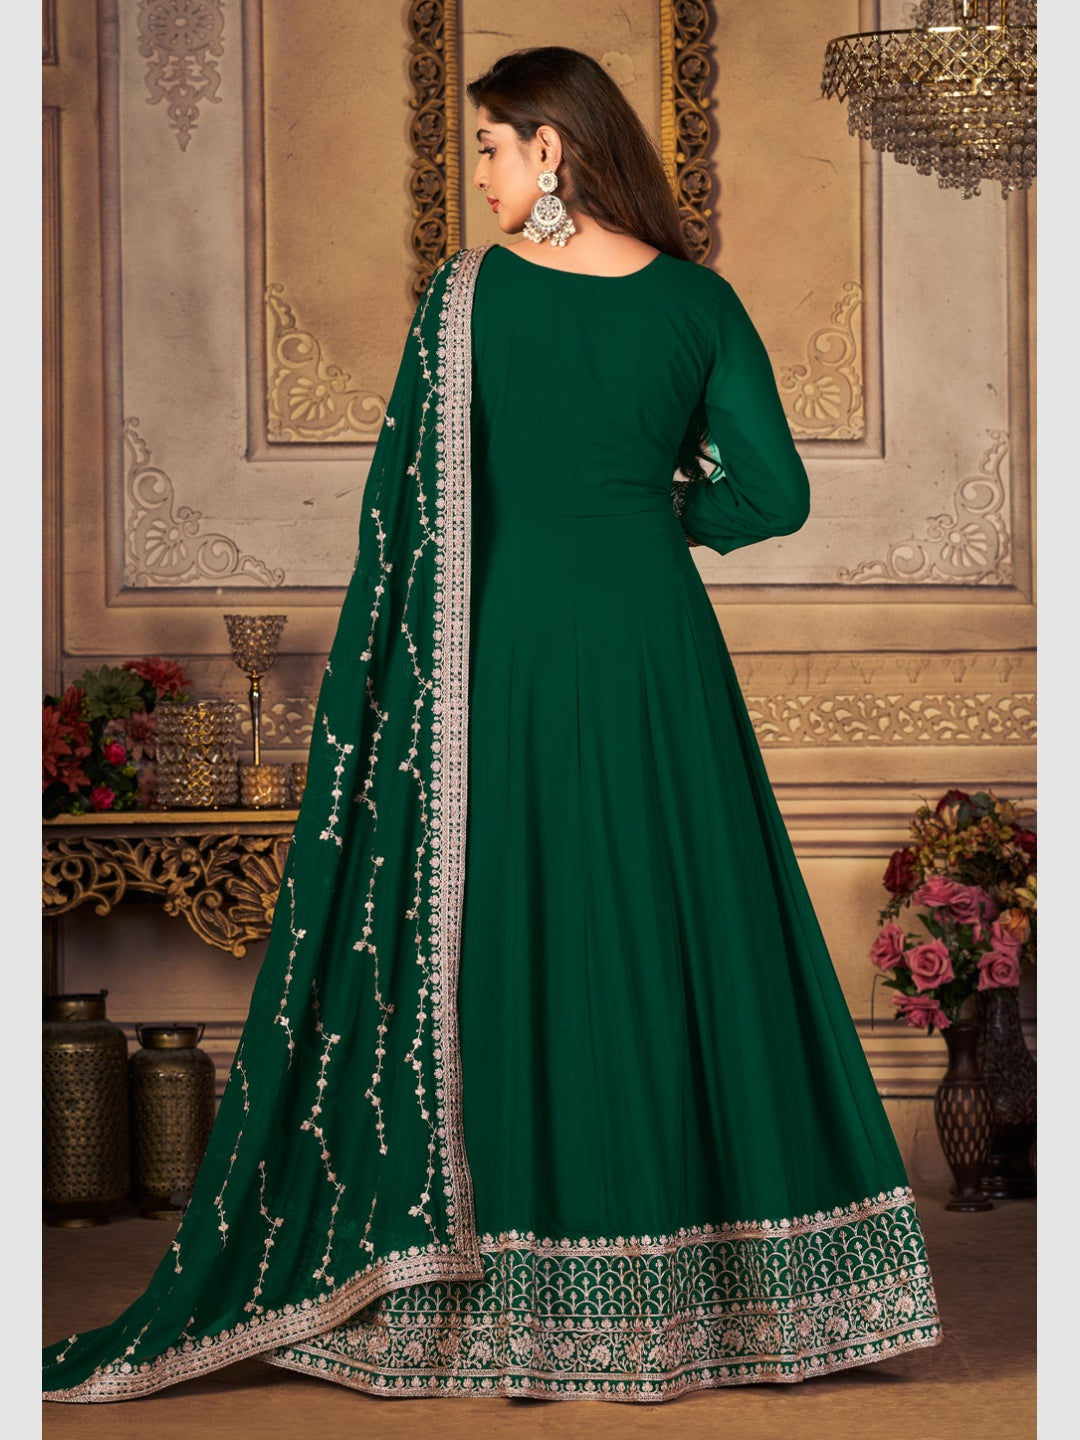 Bottle Green Georgette Hand Embroidered Anarkali Suit with | Etsy | Dress  indian style, Indian bridal dress, Stylish dresses